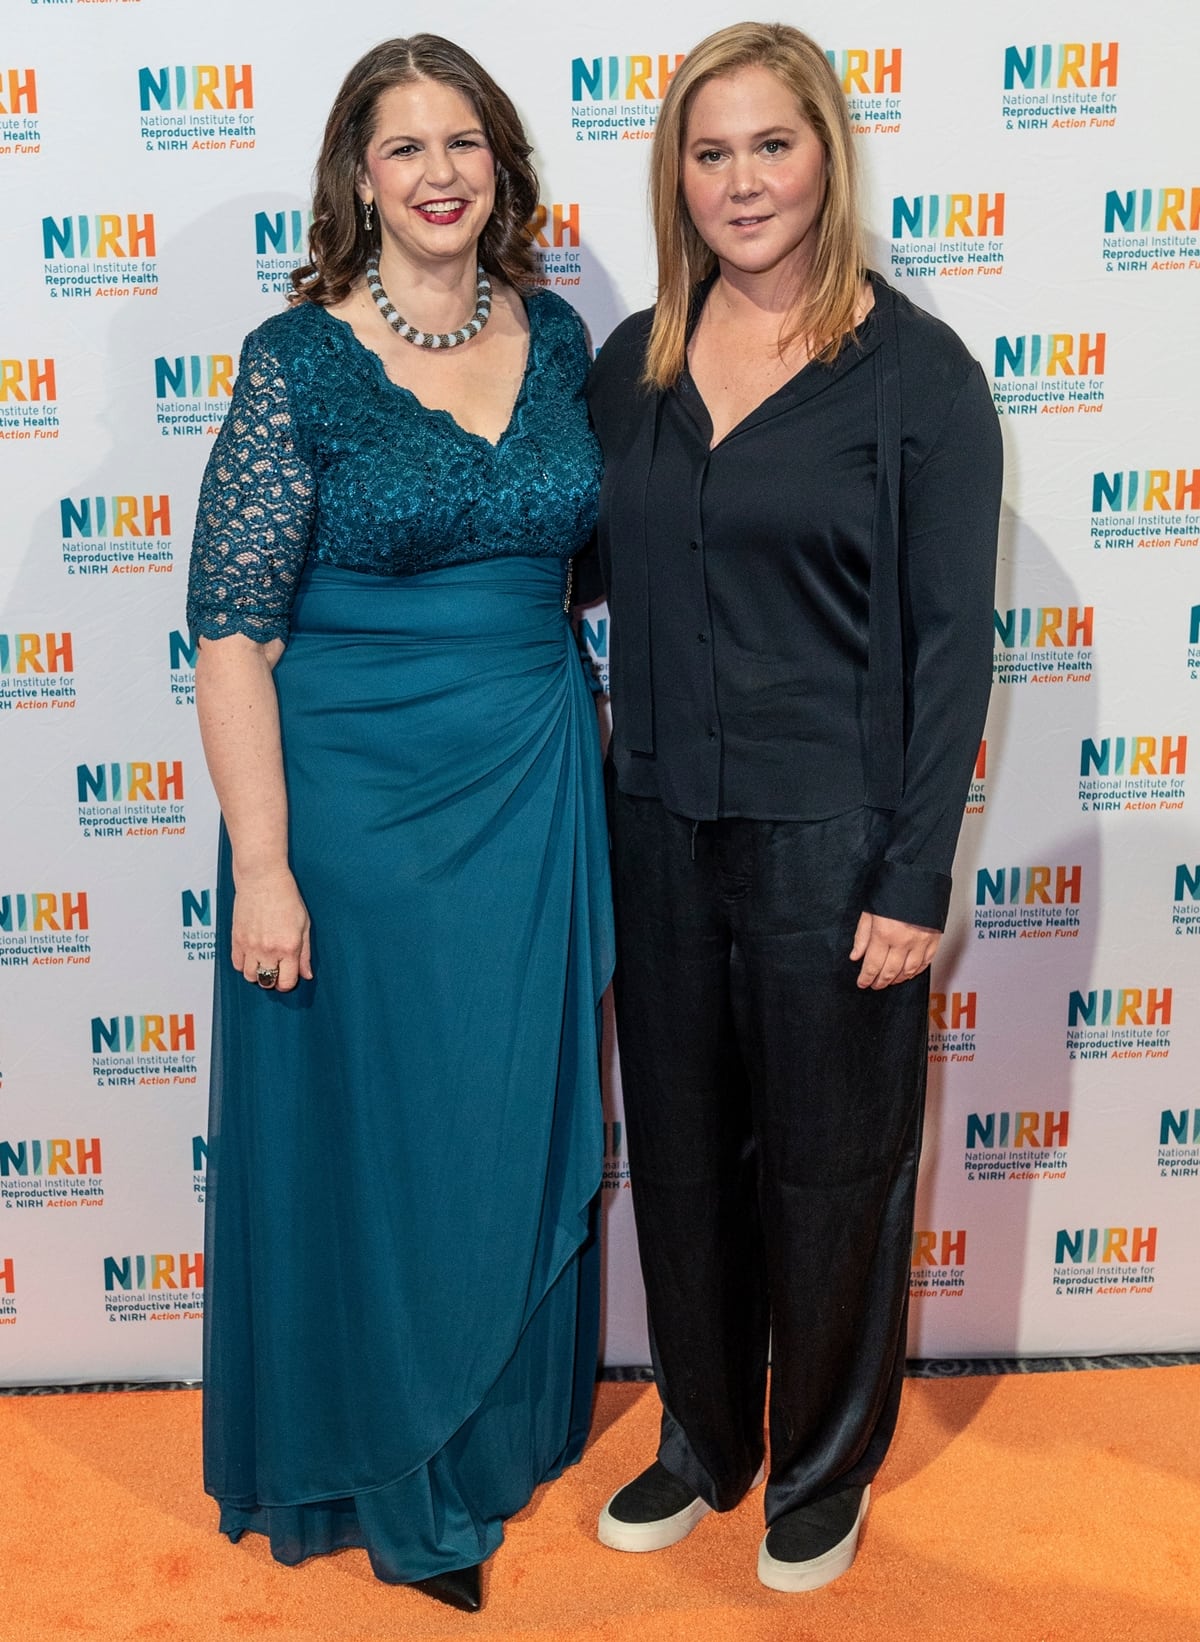 NIRH President Andrea Miller and comedian Amy Schumer at the Champions of Choice Awards